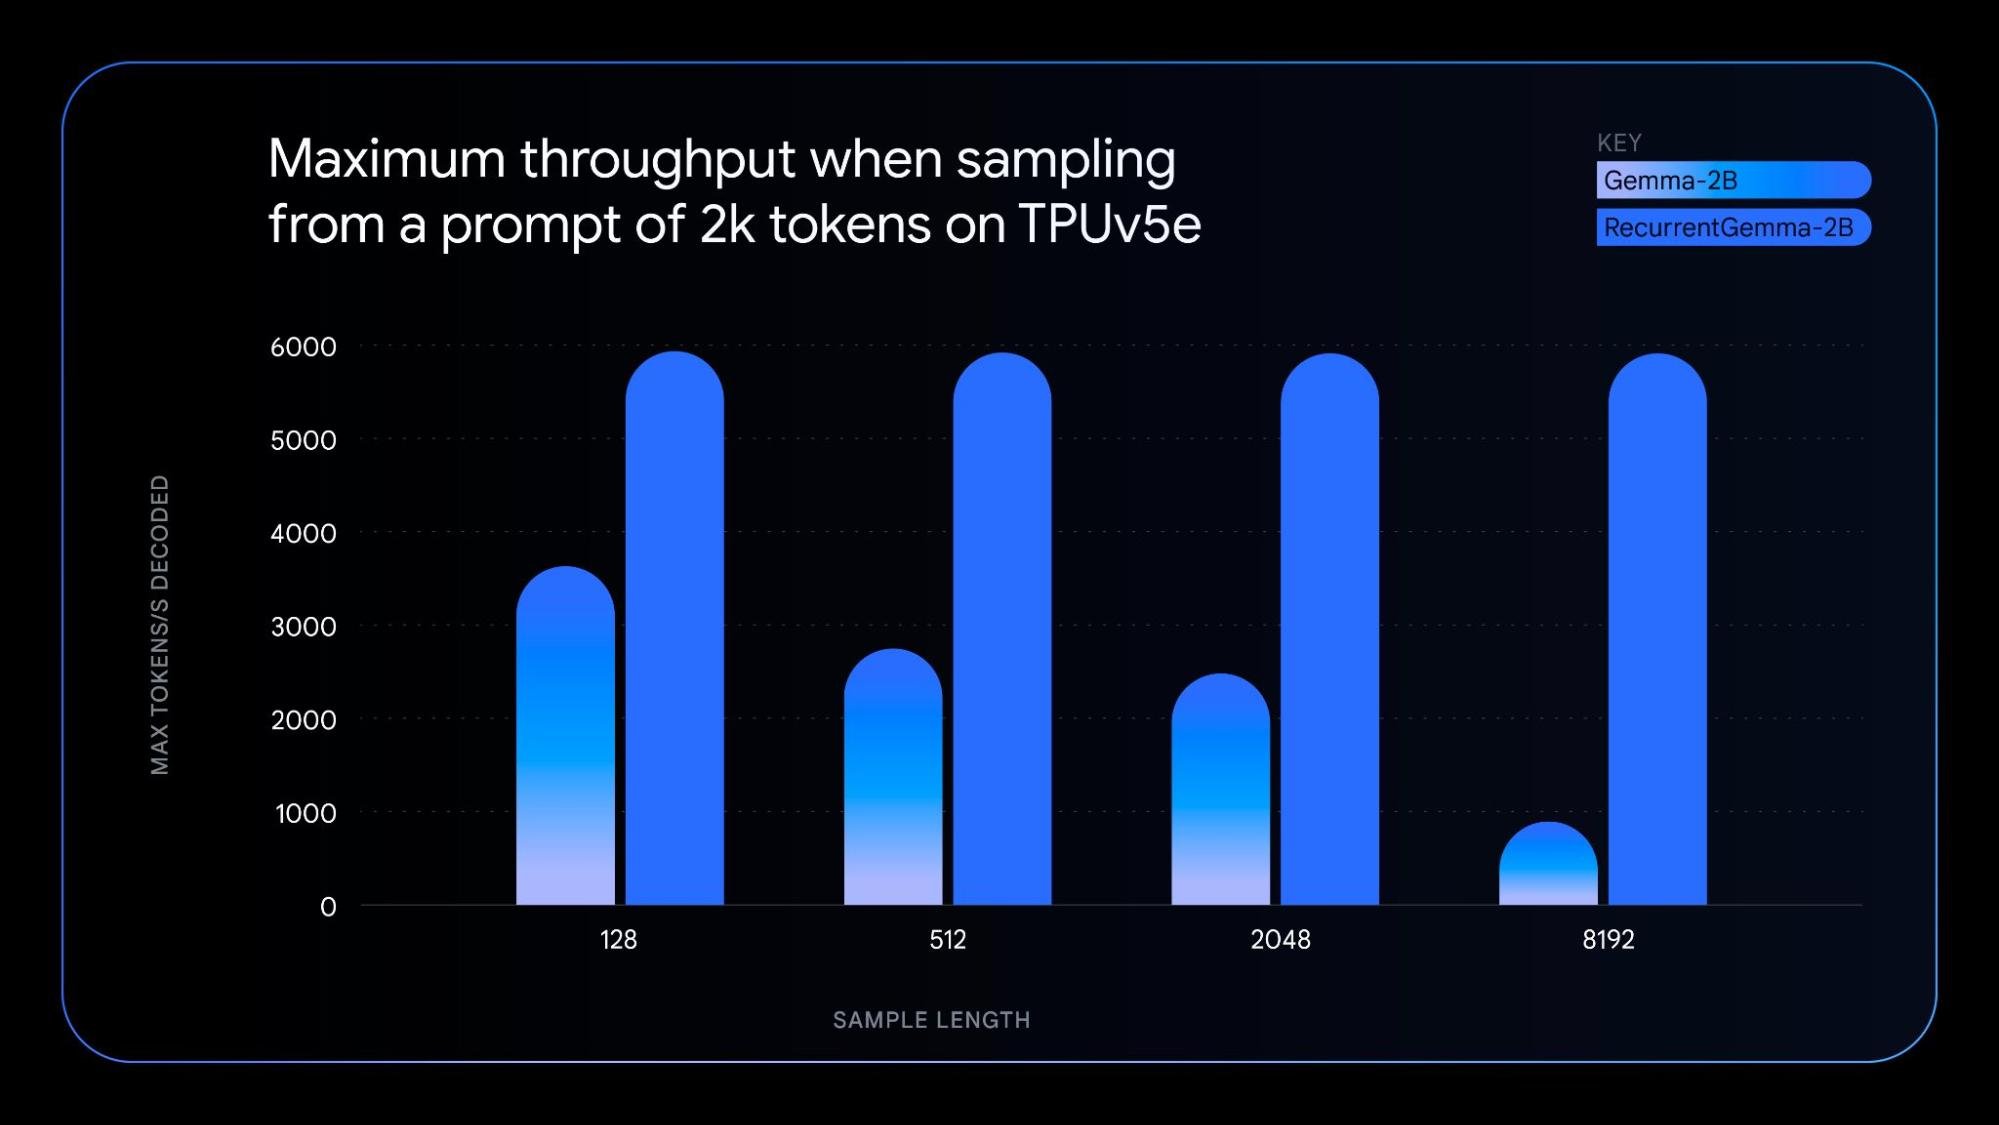 Graph showing maximum thoughput when sampling from a prompt of 2k tokens on TPUv5e